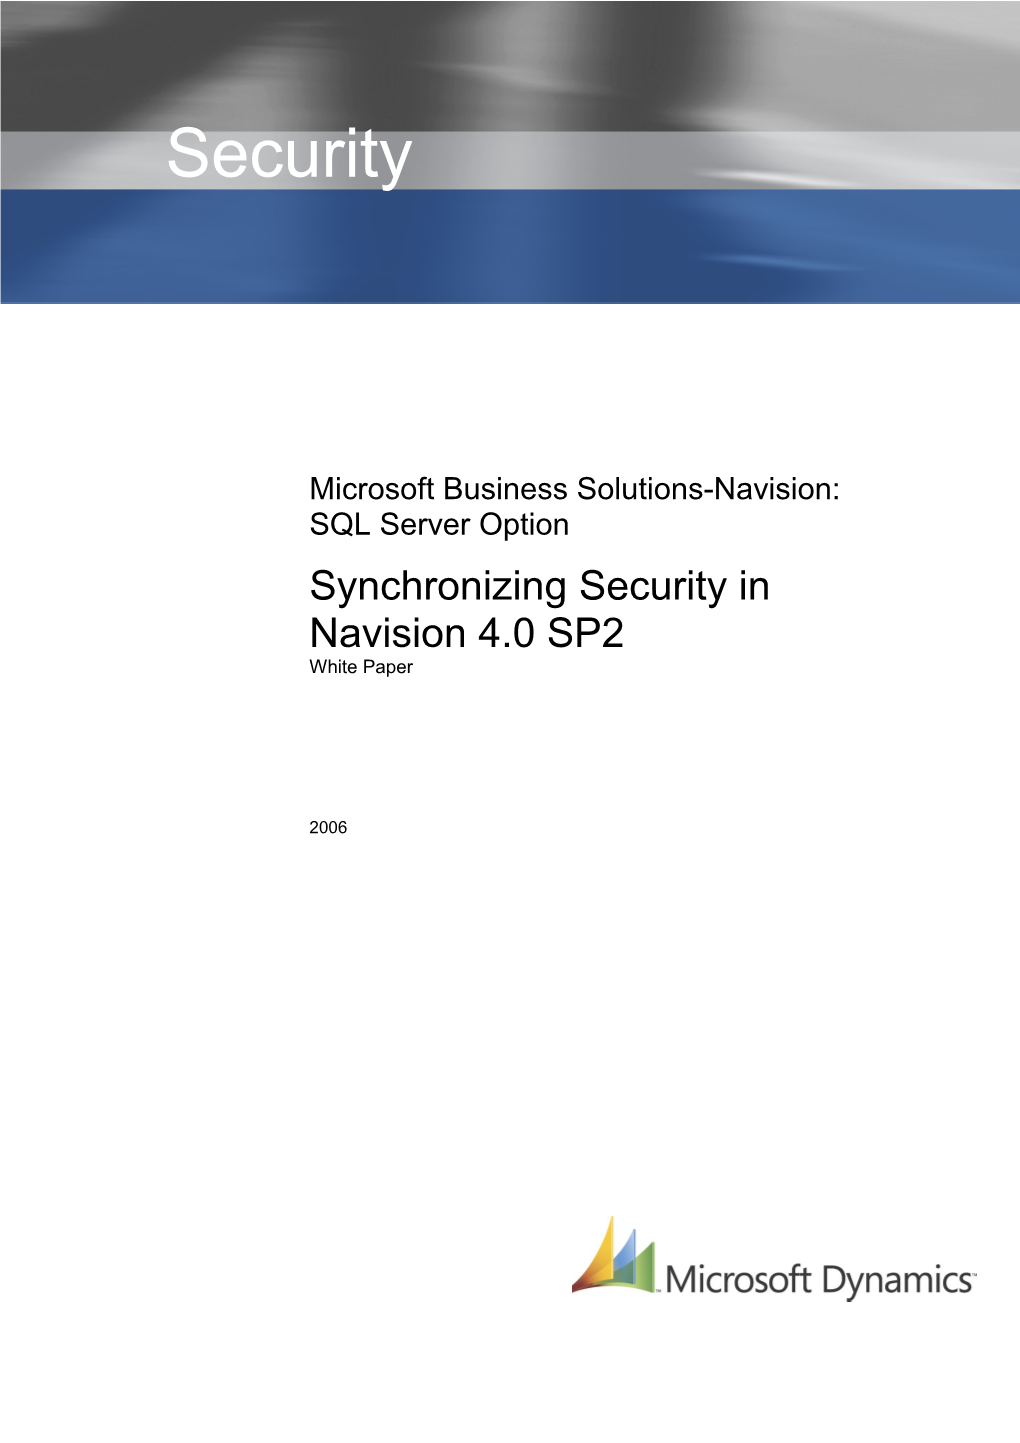 Synchronizing Security in Navision 4.0 SP2